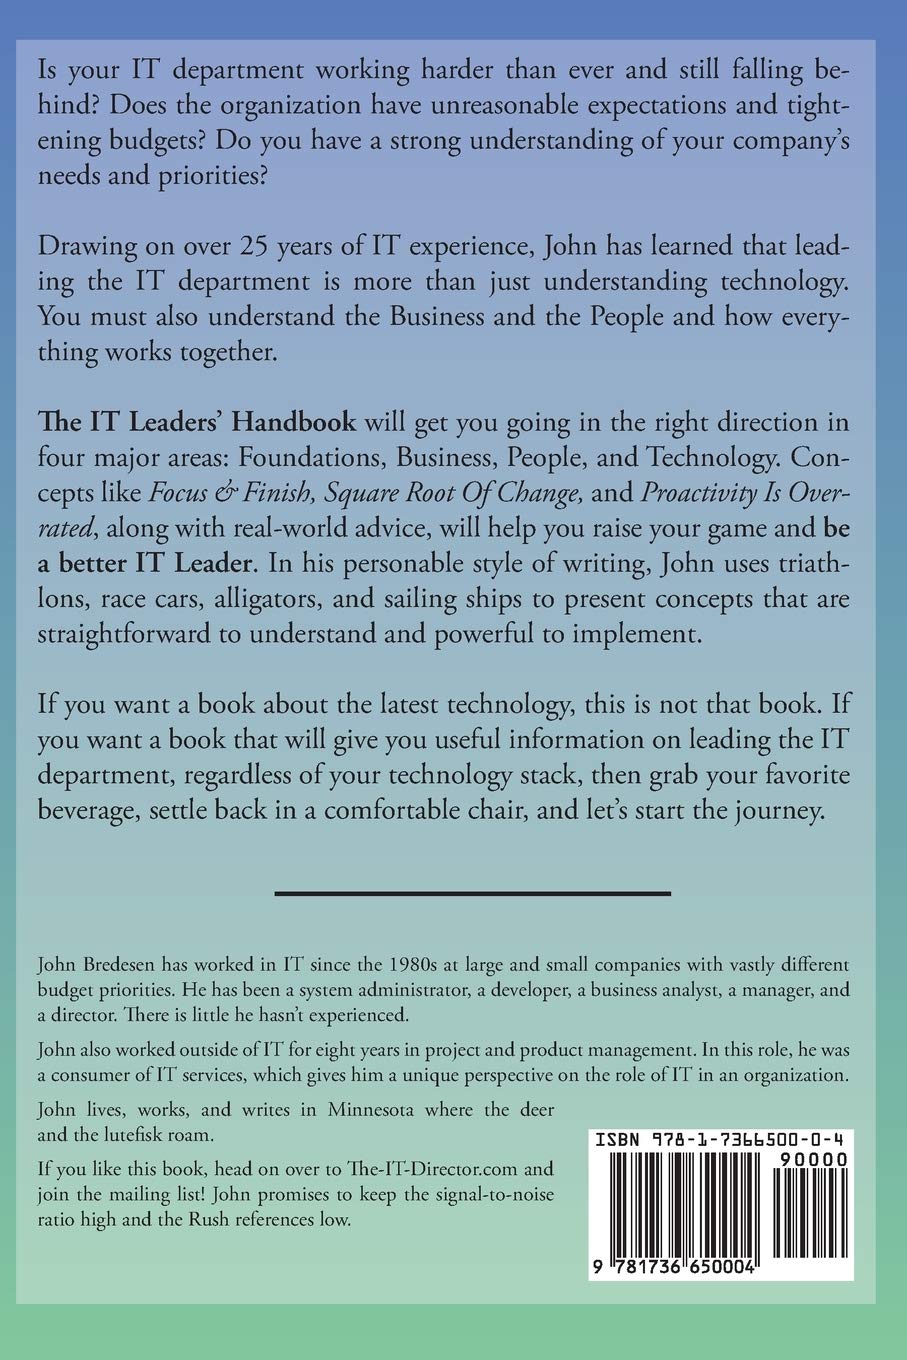 The I.T. Leaders' Handbook: Foundations for Leading the Information Technology Department (The I.T. Director Series)